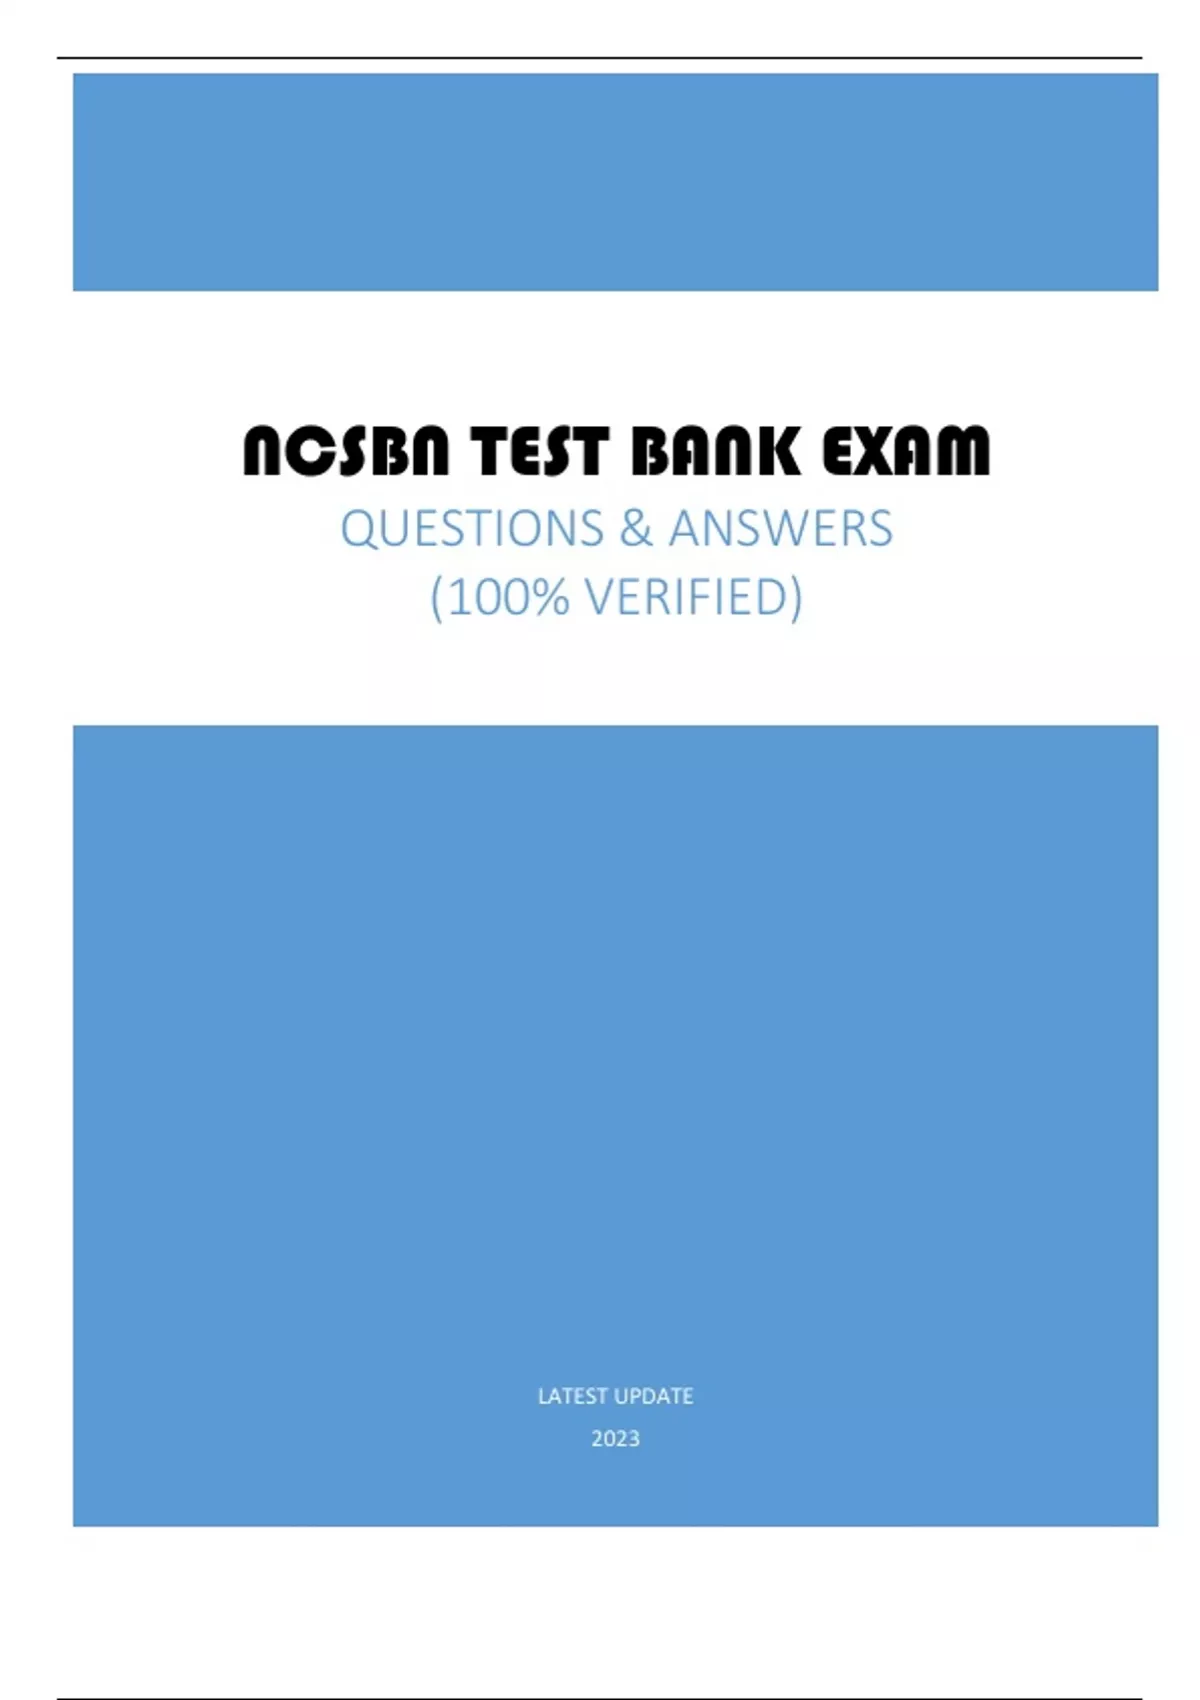 NCSBN TEST BANK EXAM QUESTIONS & ANSWERS EXPLAINED (SCORED 98